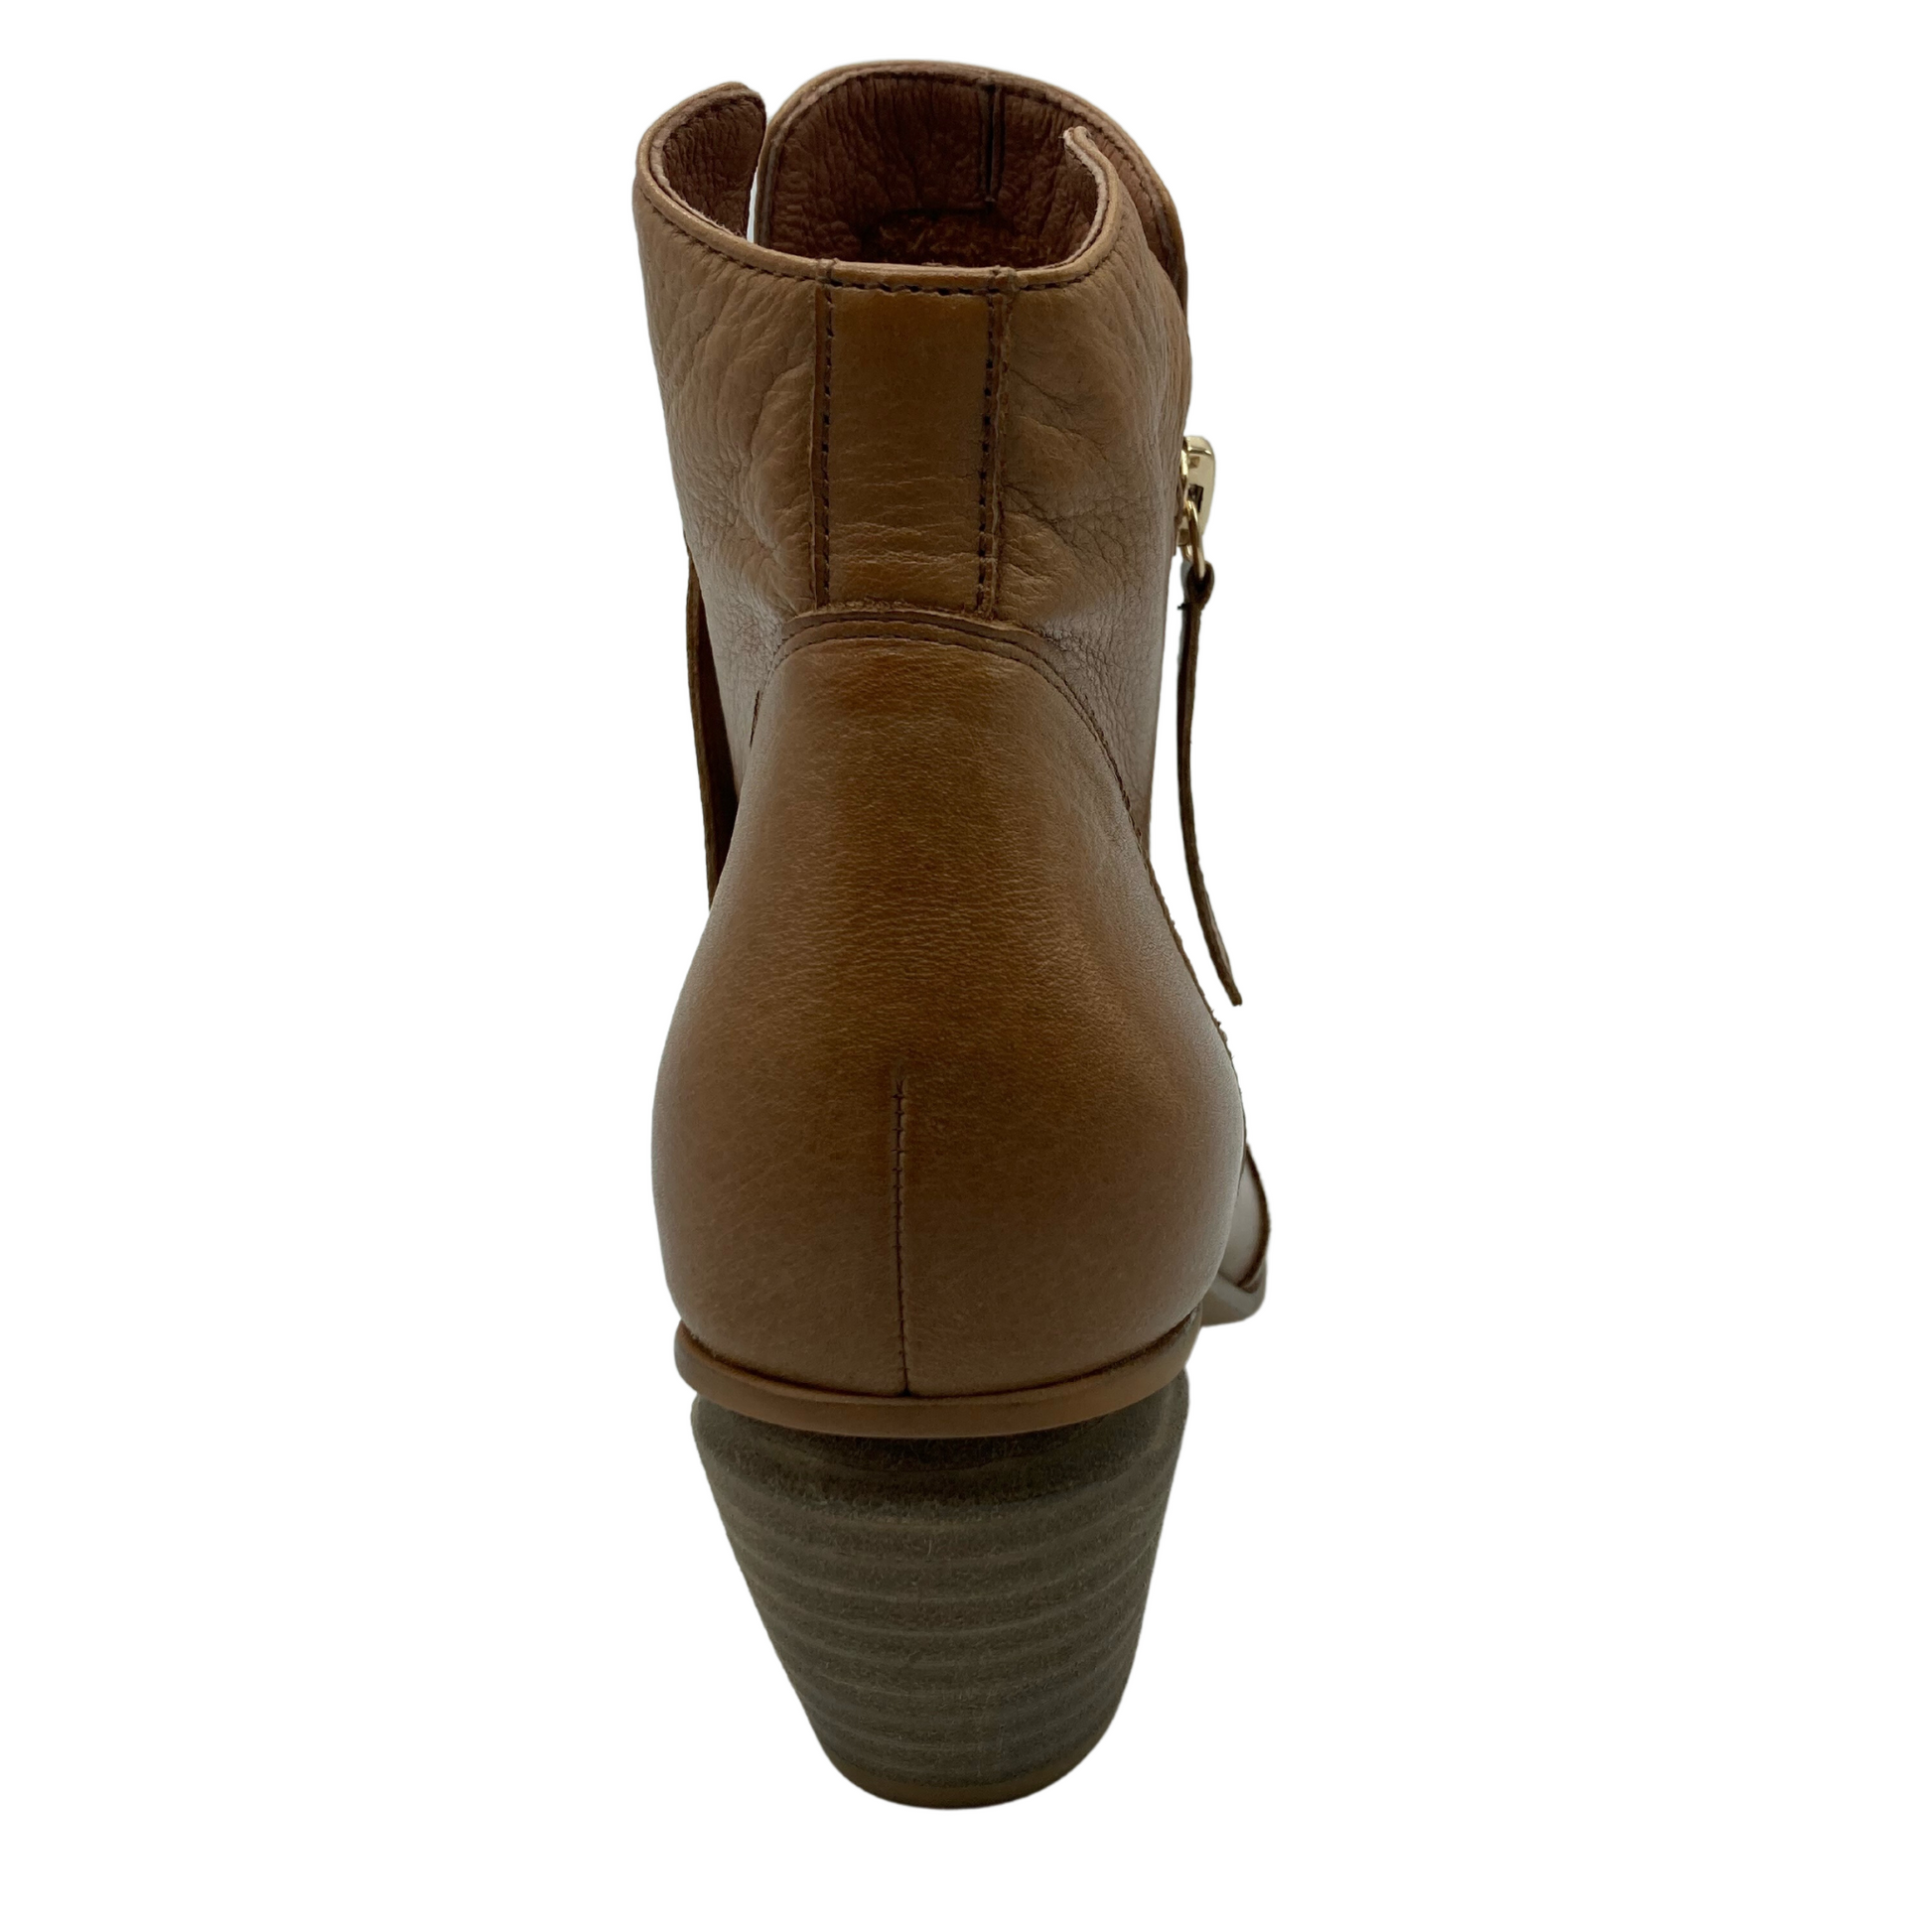 Hind view of back of brown leather short boot with chunky heel